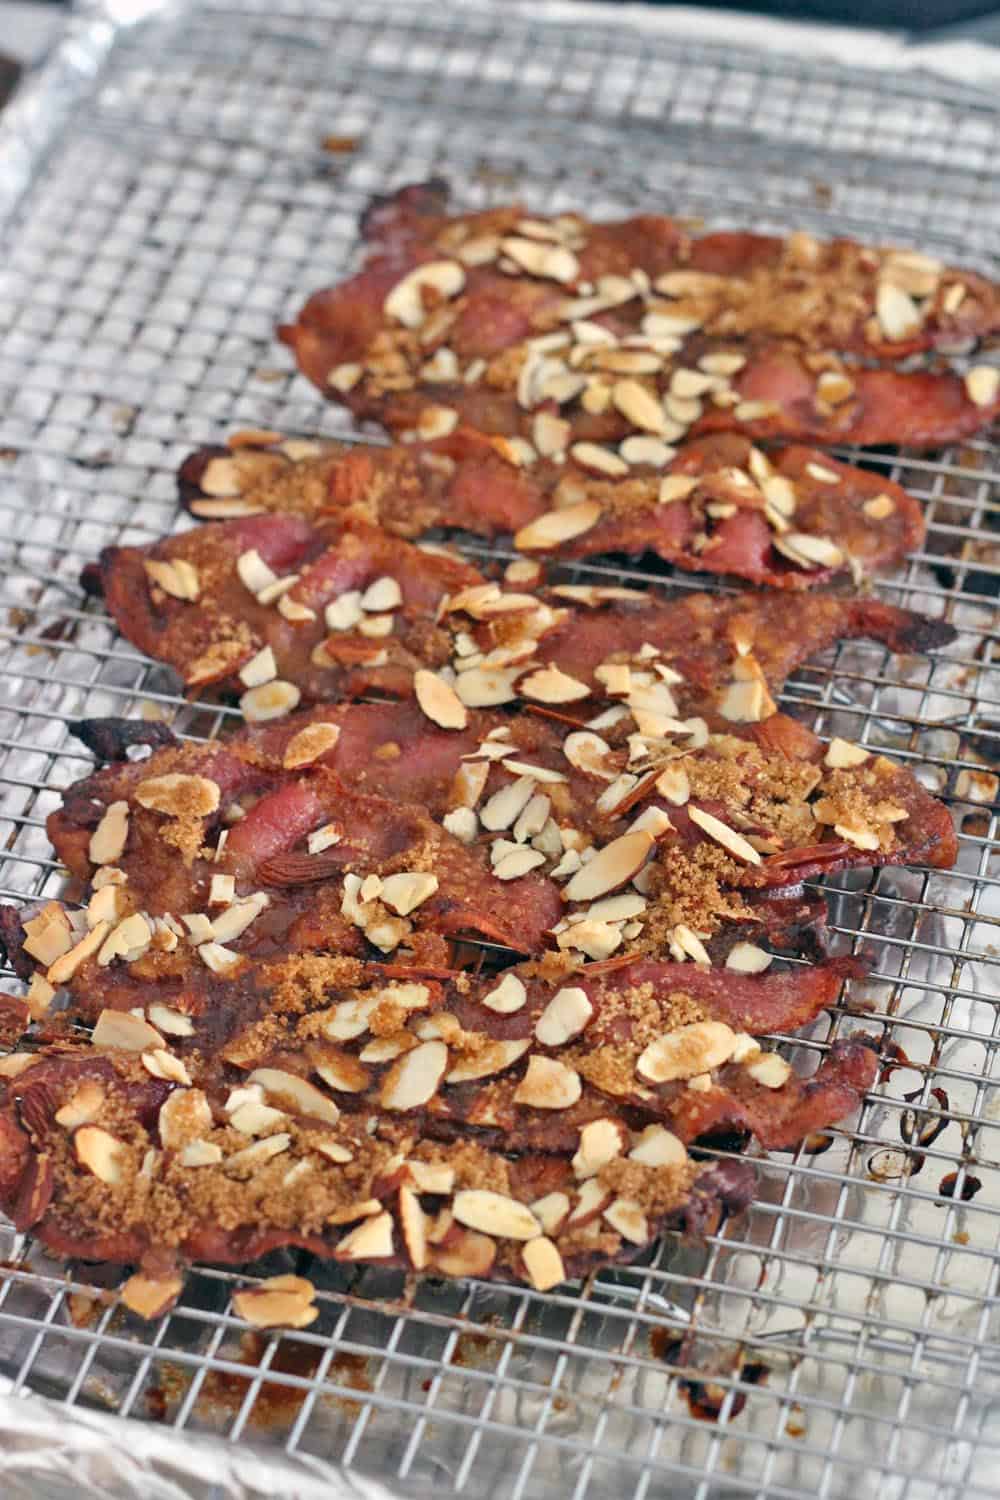 Praline bacon (bacon topped with brown sugar and sliced almonds) on a wire rack.